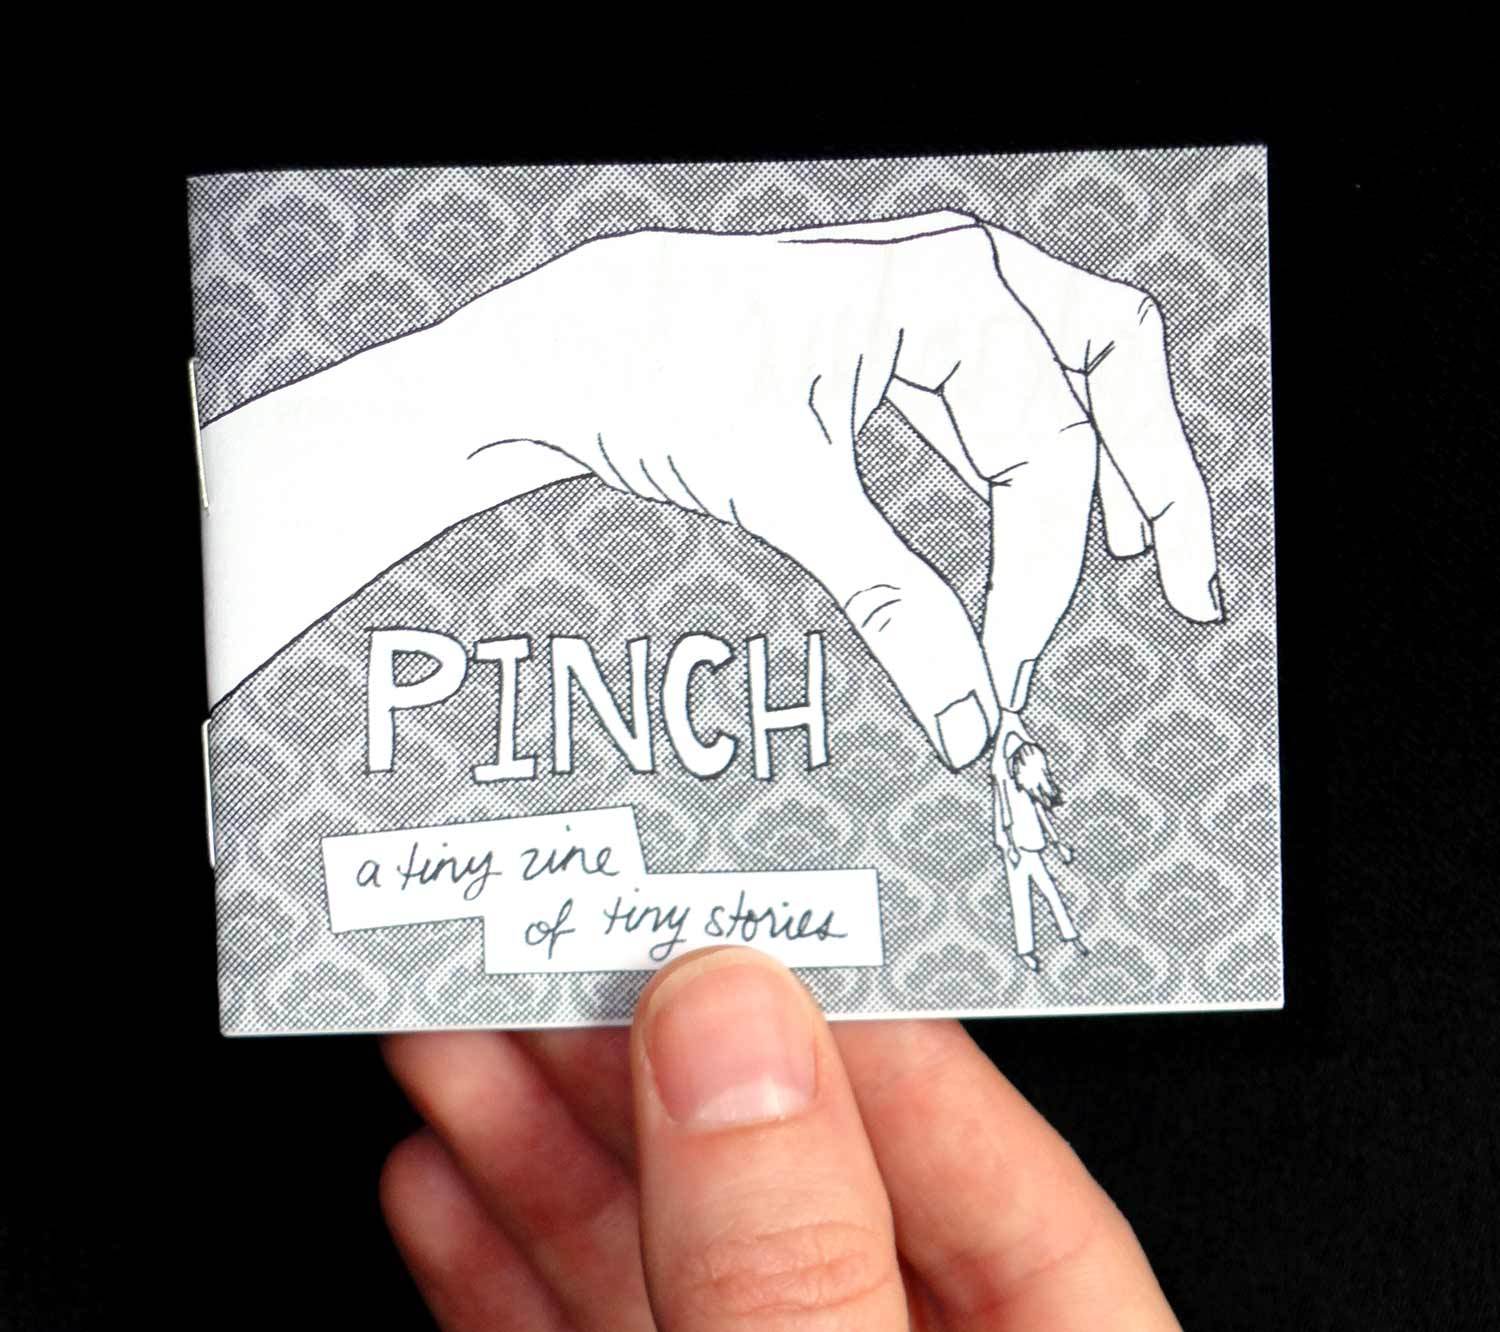 Graphic design, illustration, and layout for Pinch